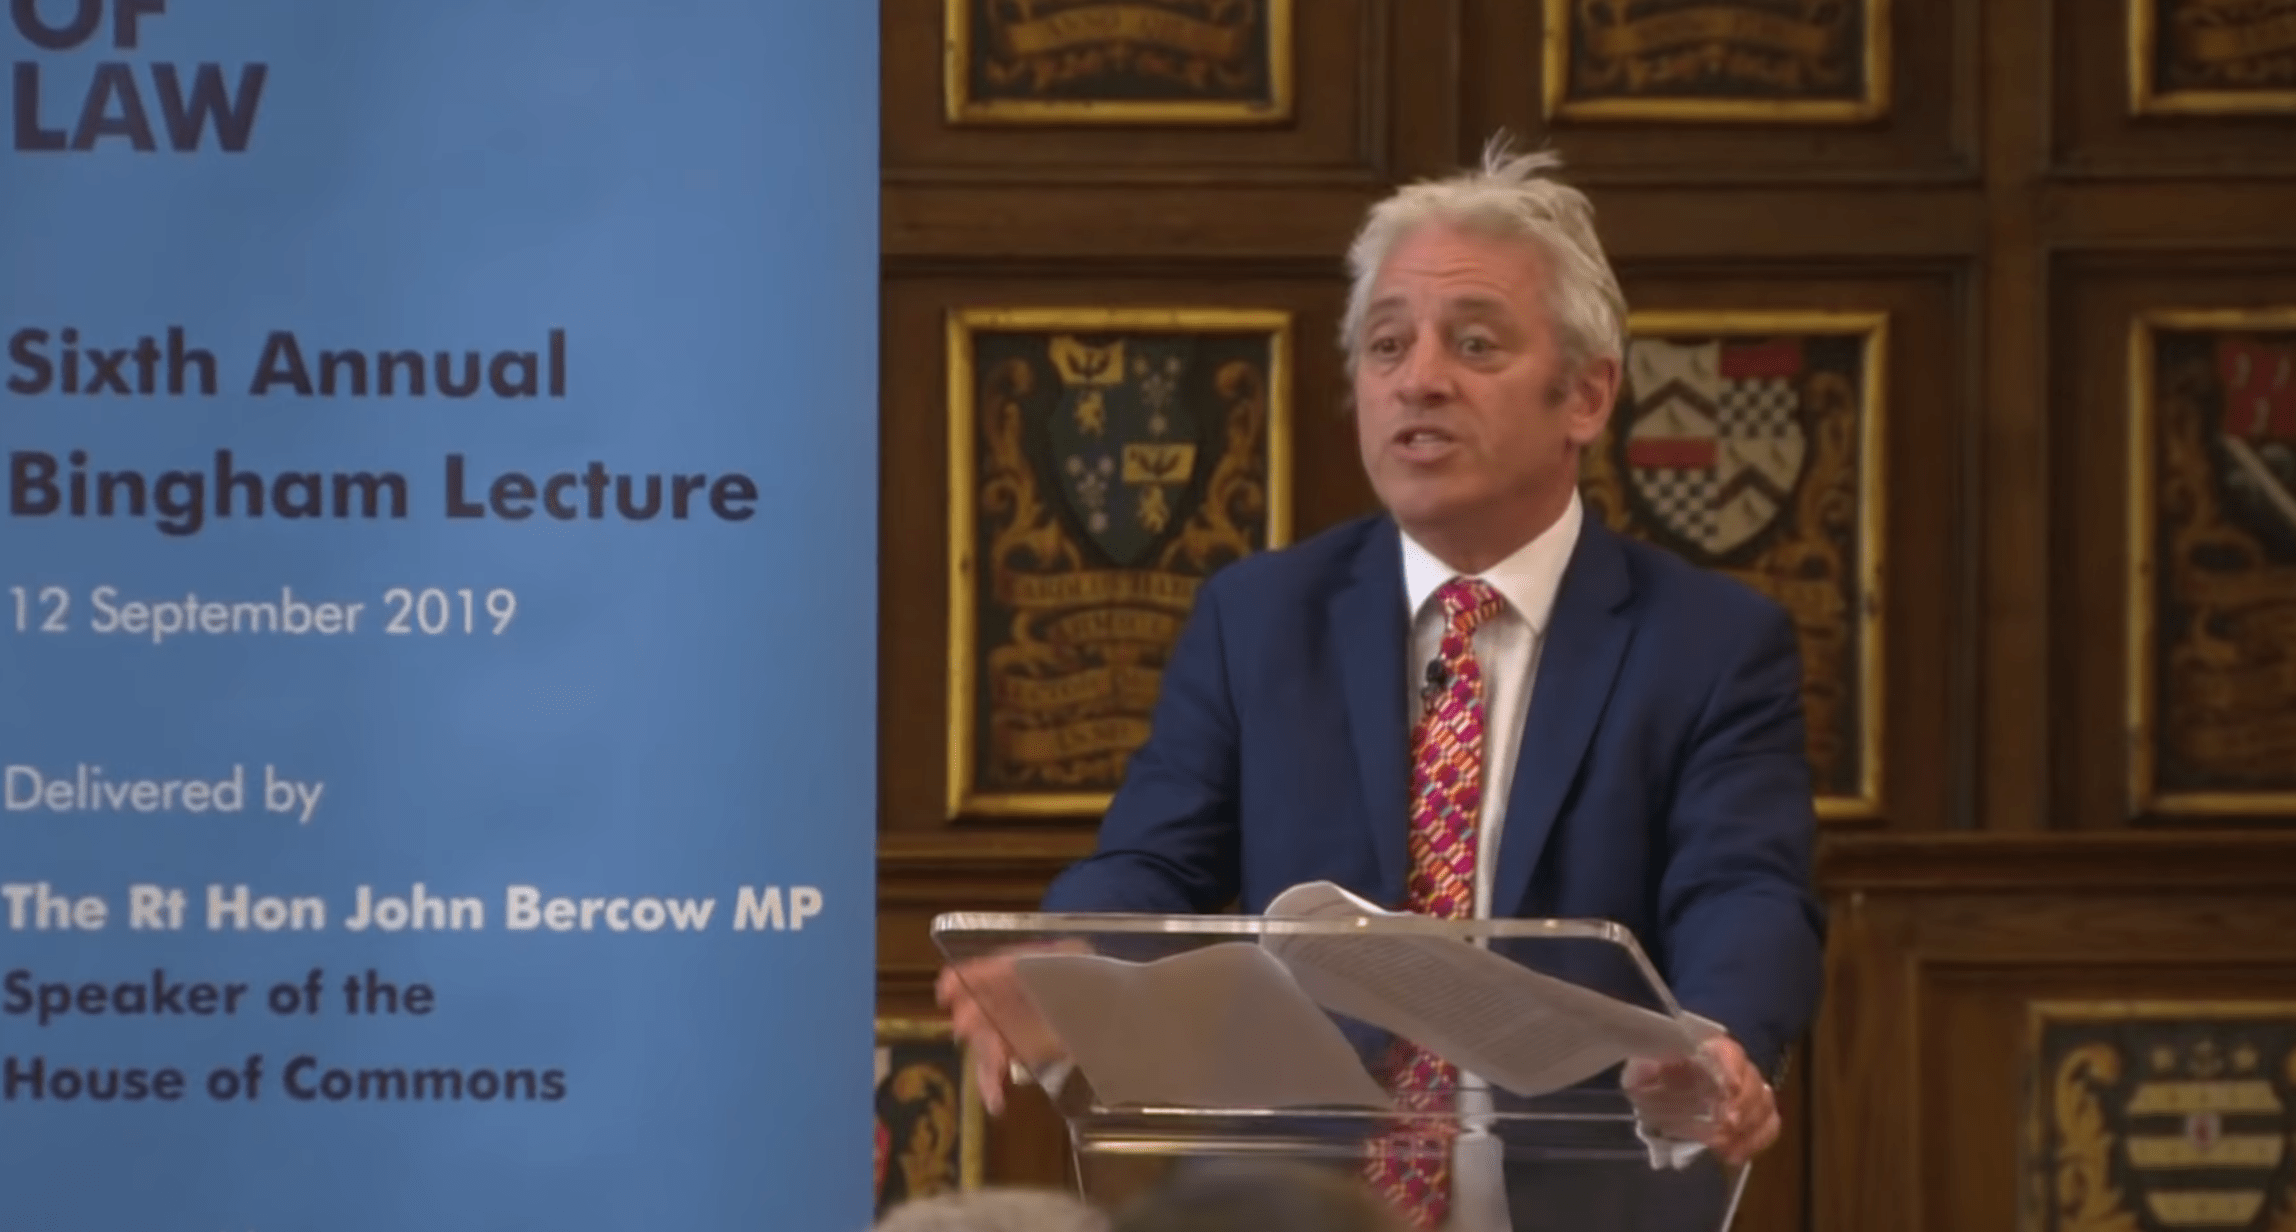 Why the resignation speech by Speaker Bercow matters